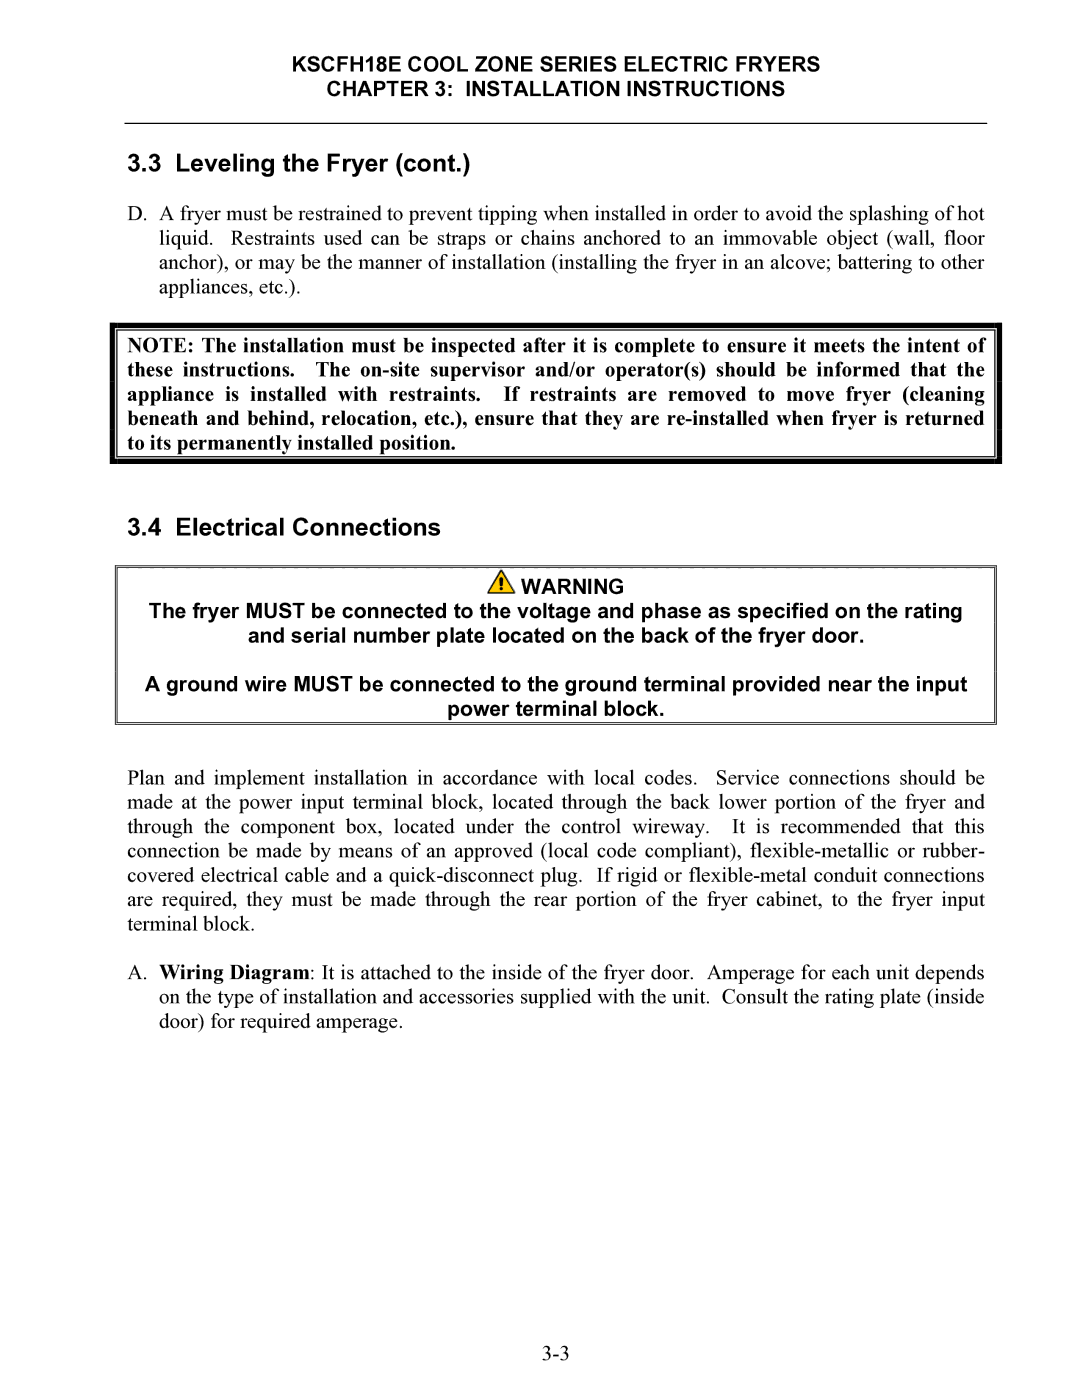 Frymaster KSCFH18E operation manual Electrical Connections 